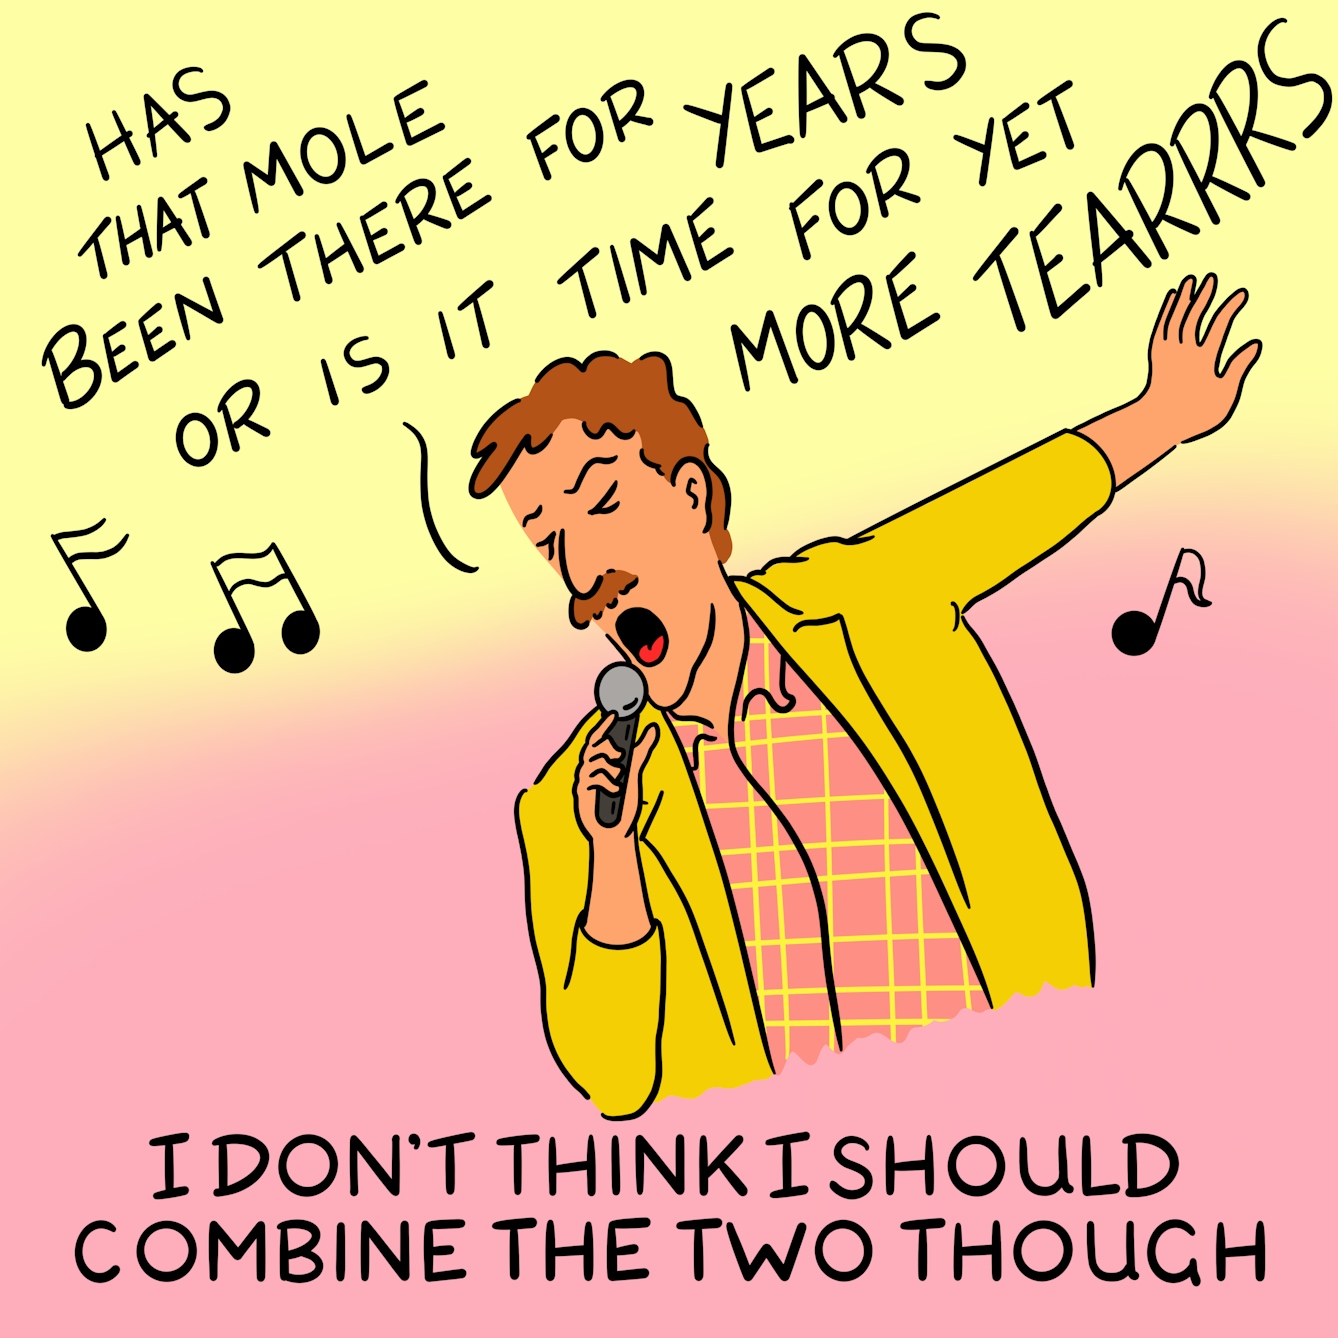 Panel 4 of a four-panel comic drawn digitally: a white man with a moustache in a plaid shirt and gold jacket sings into a microphone. Musical notes waver around him and the words "Has that mole been there for years or is it time for yet more tearrrs" float out of his mouth. The caption text reads "I don't think I should combine the two though"